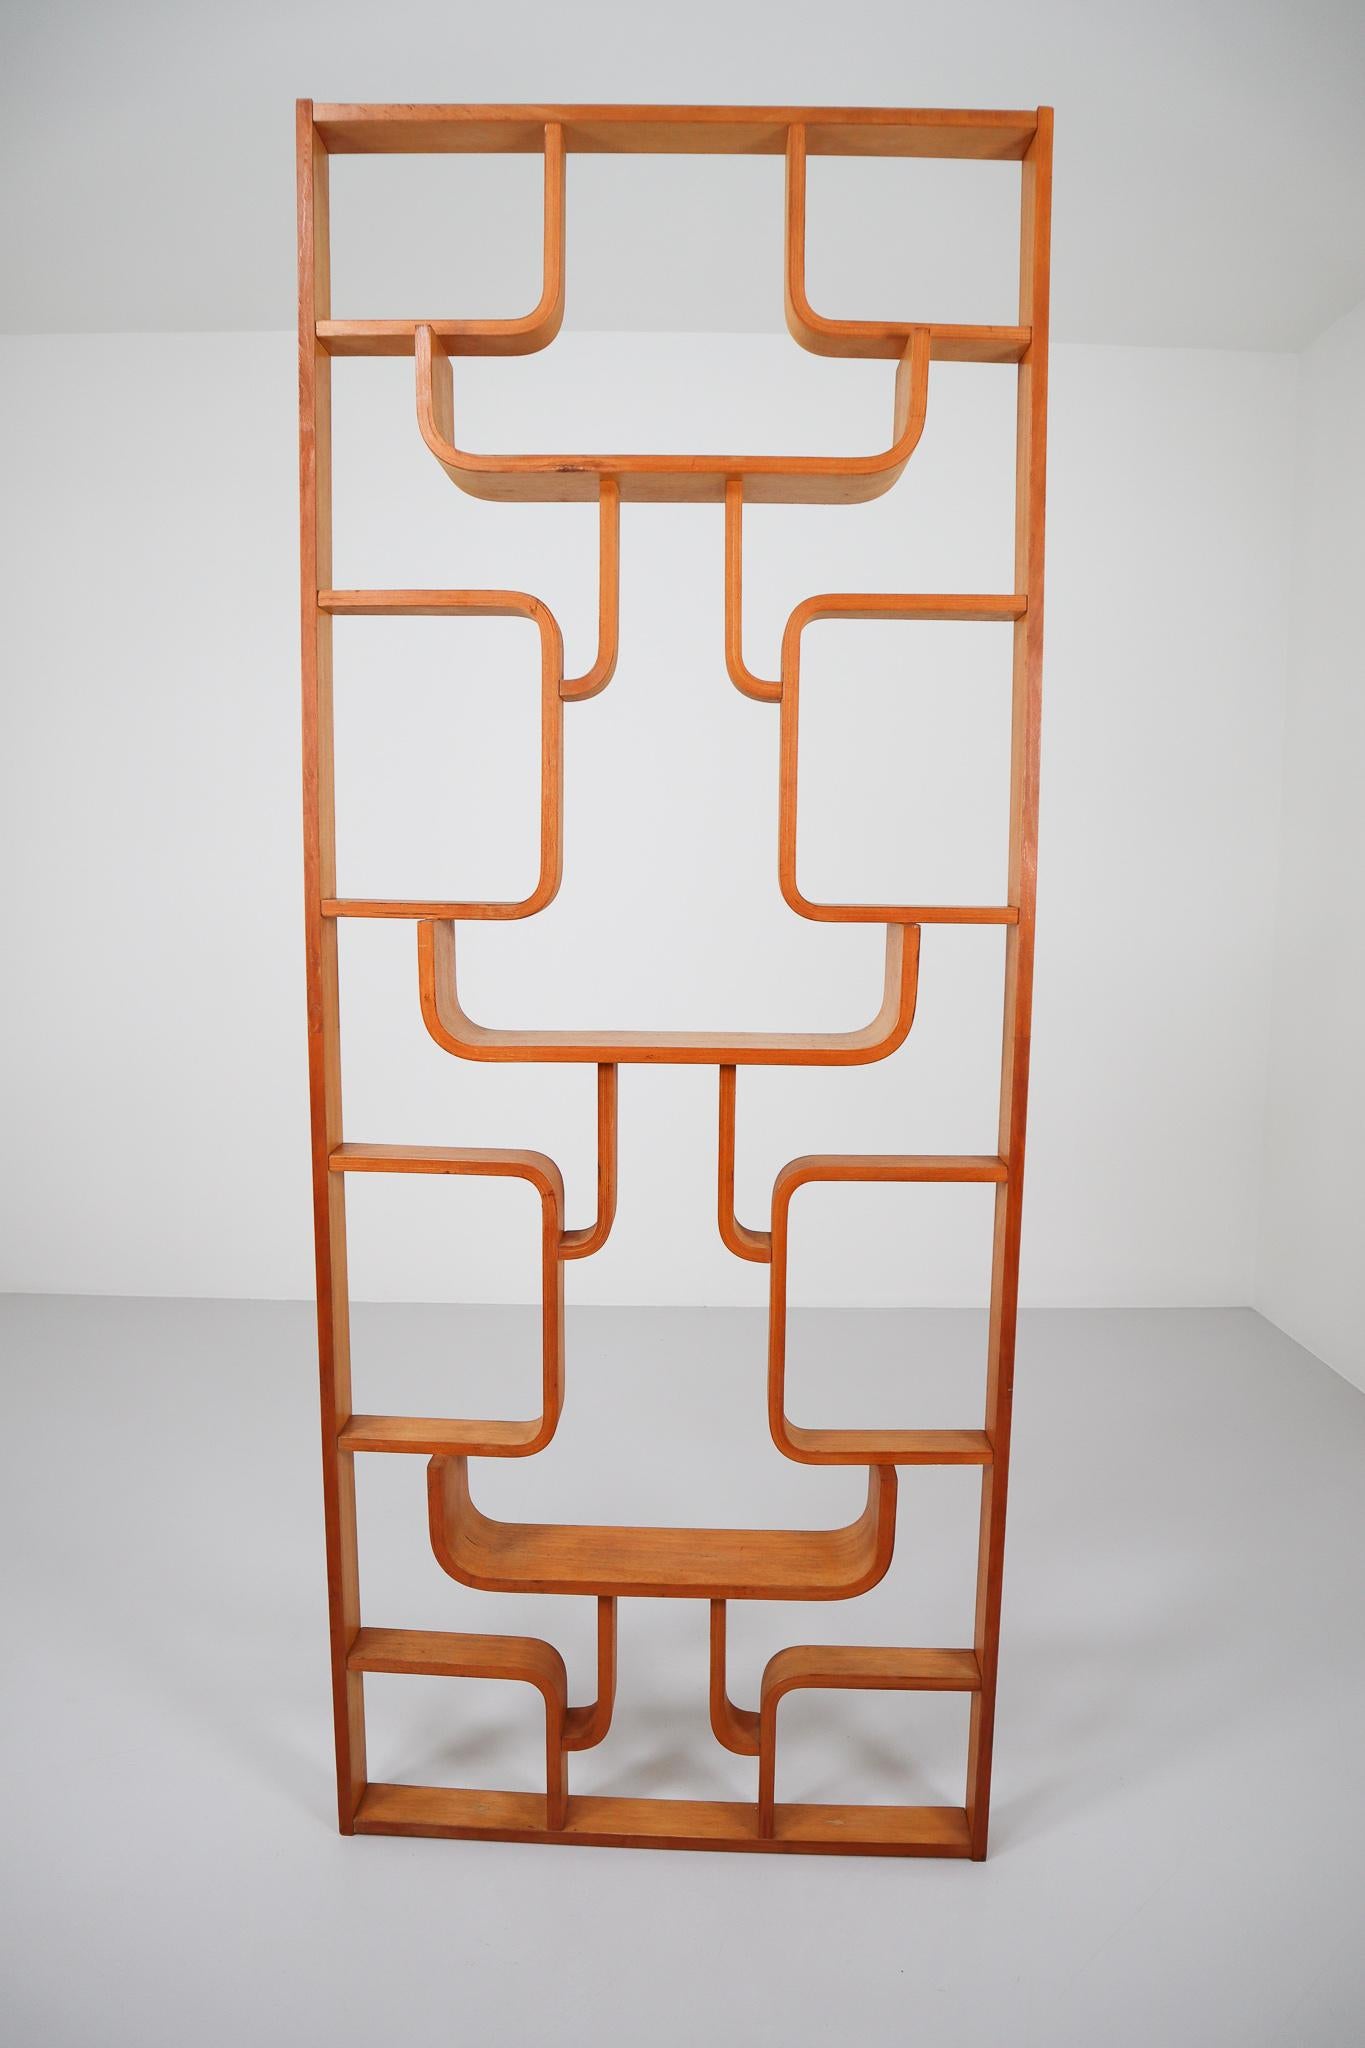 Midcentury flower (dividing) wall made of bentwood in blond color plywood and features geometric patterns, designed by Ludvik Volak in the Czech Republic in the 1950s-1960s and manufactured by TON (Thonet) good condition and some minor patina on